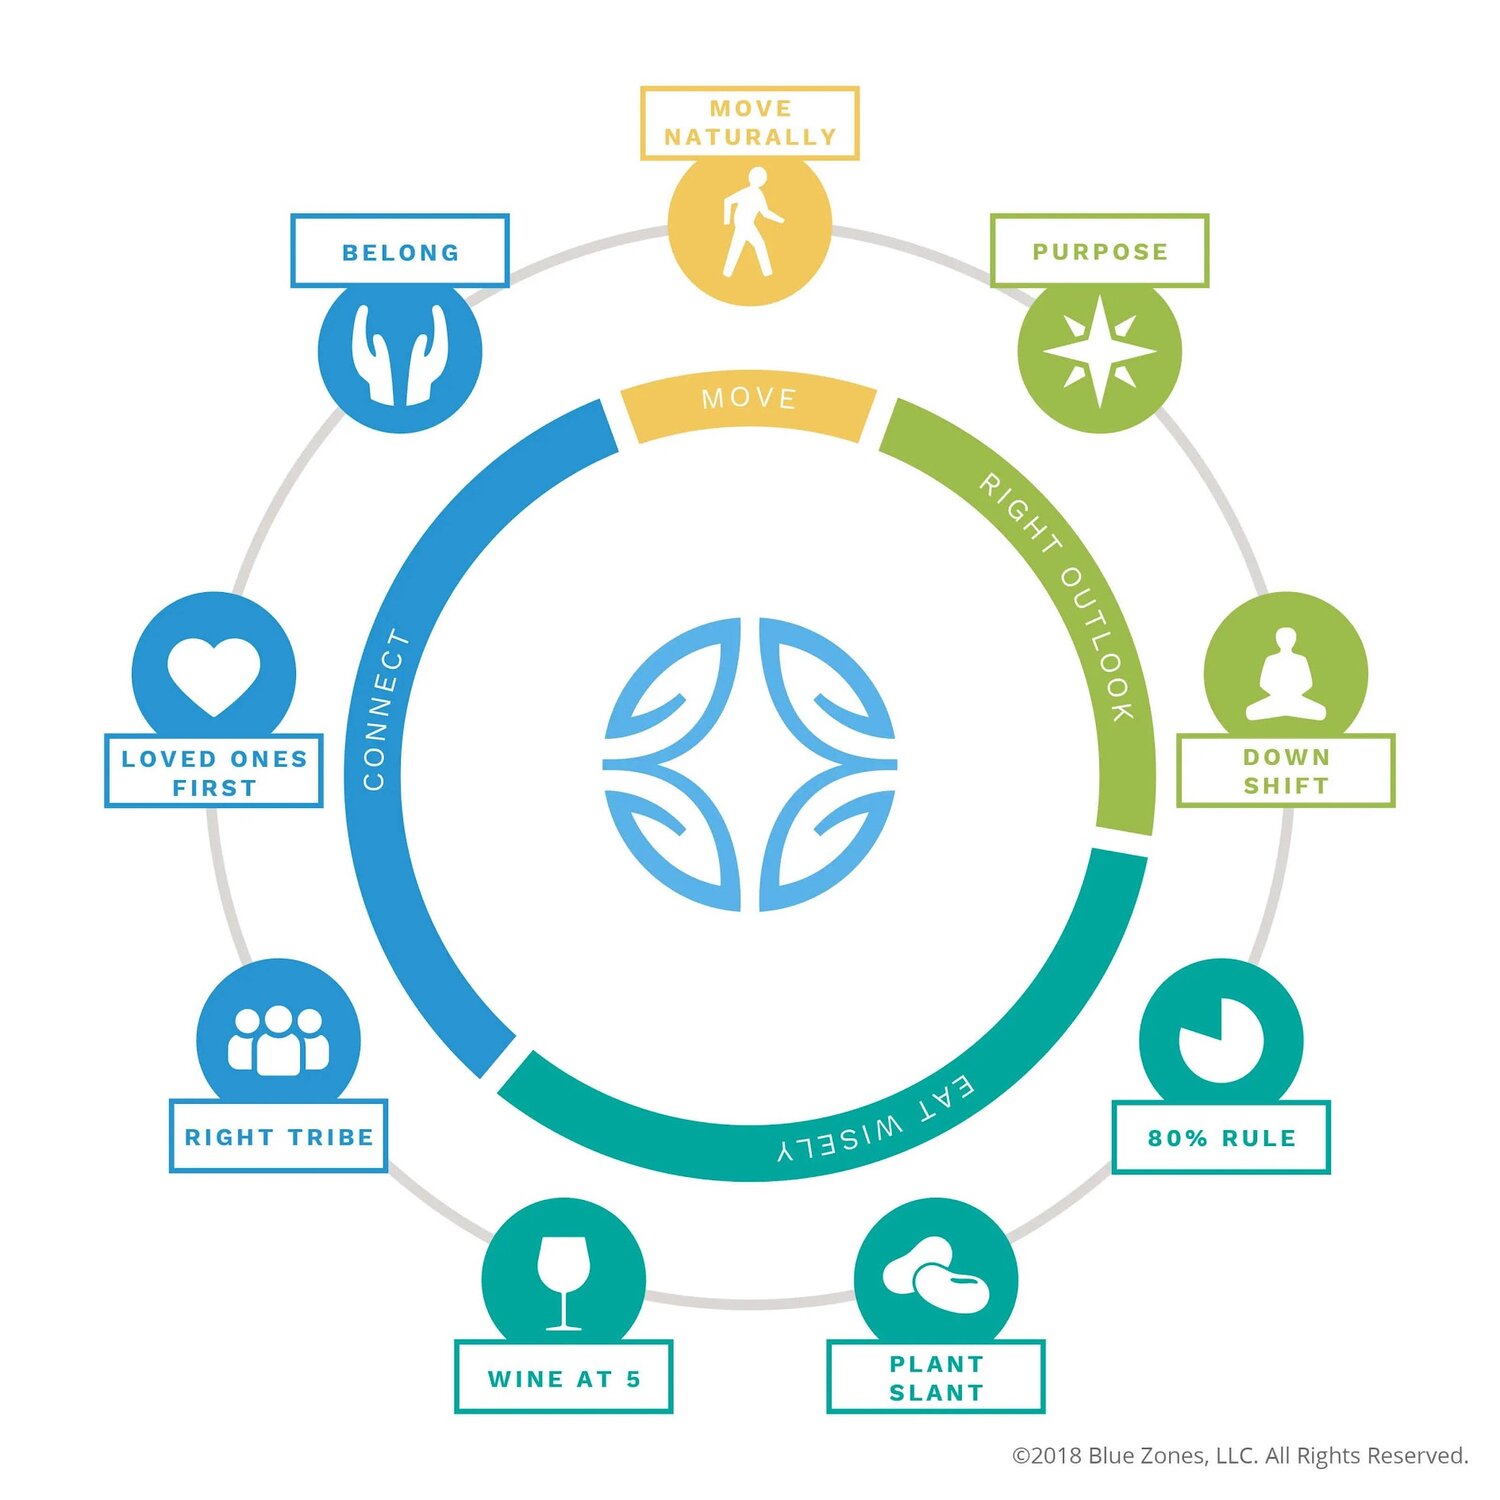 The "Power 9" are the ways that people in "Blue Zones" live healthy lives into their 90s and beyond. The four general categories are to move more; have a purposeful and positive attitude; eat wisely and moderately; and make connections with community.